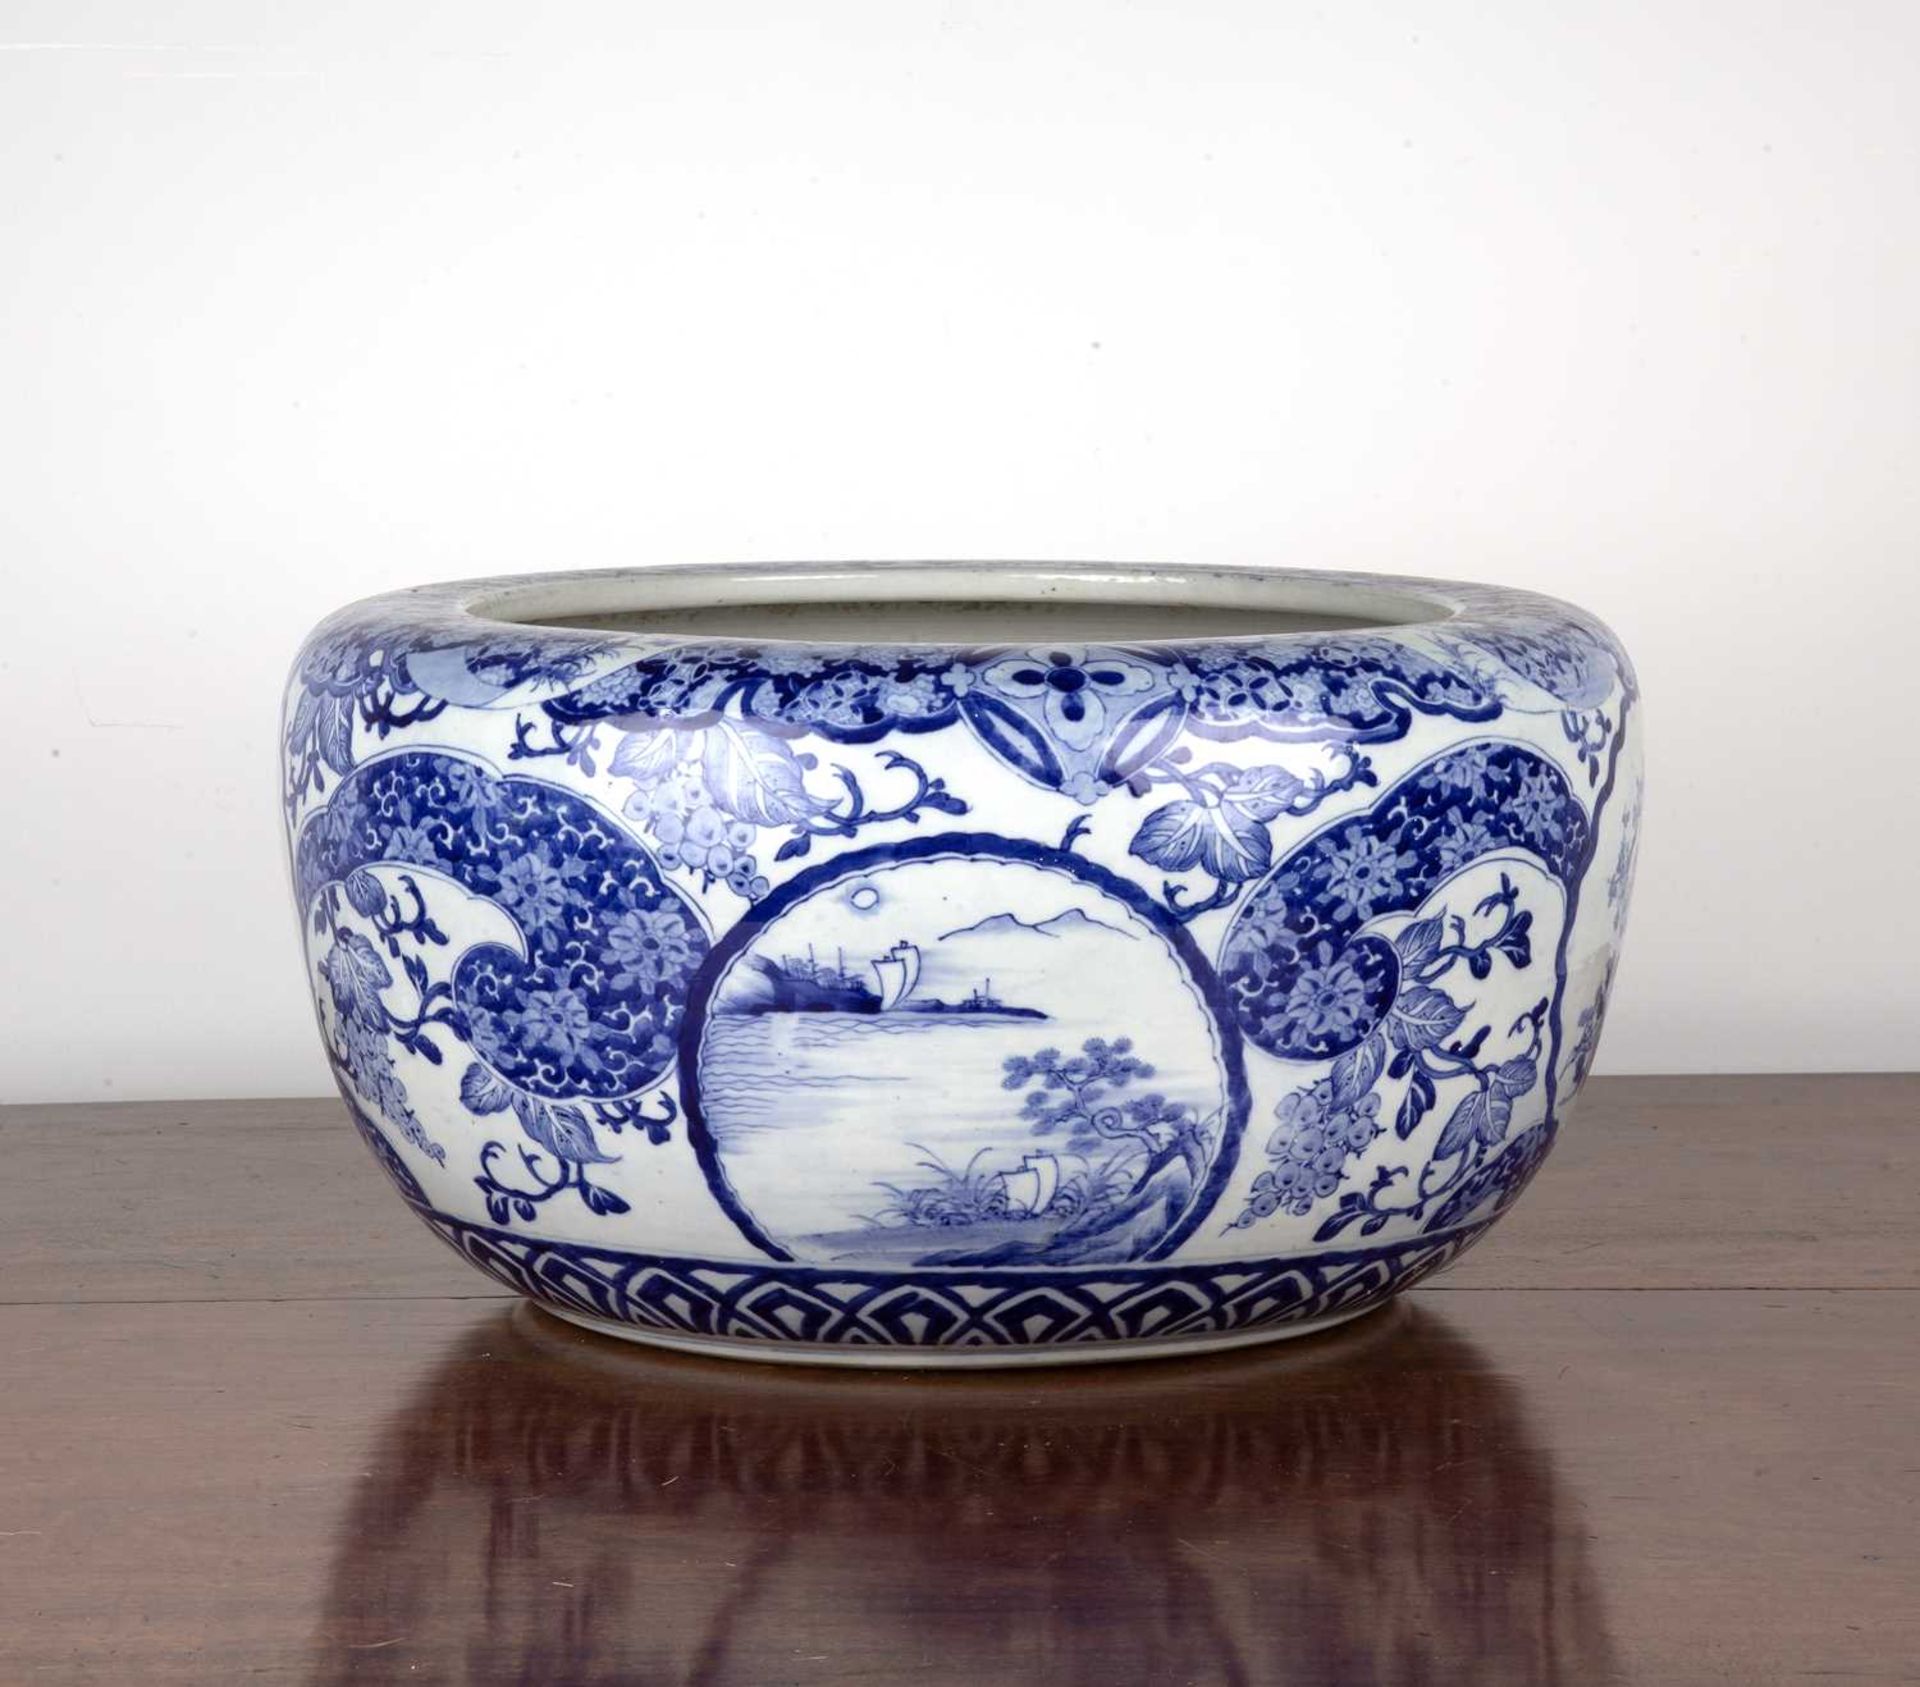 Japanese fish bowl or footbath Late 19th/early 20th Century, ceramic, with blue and white floral